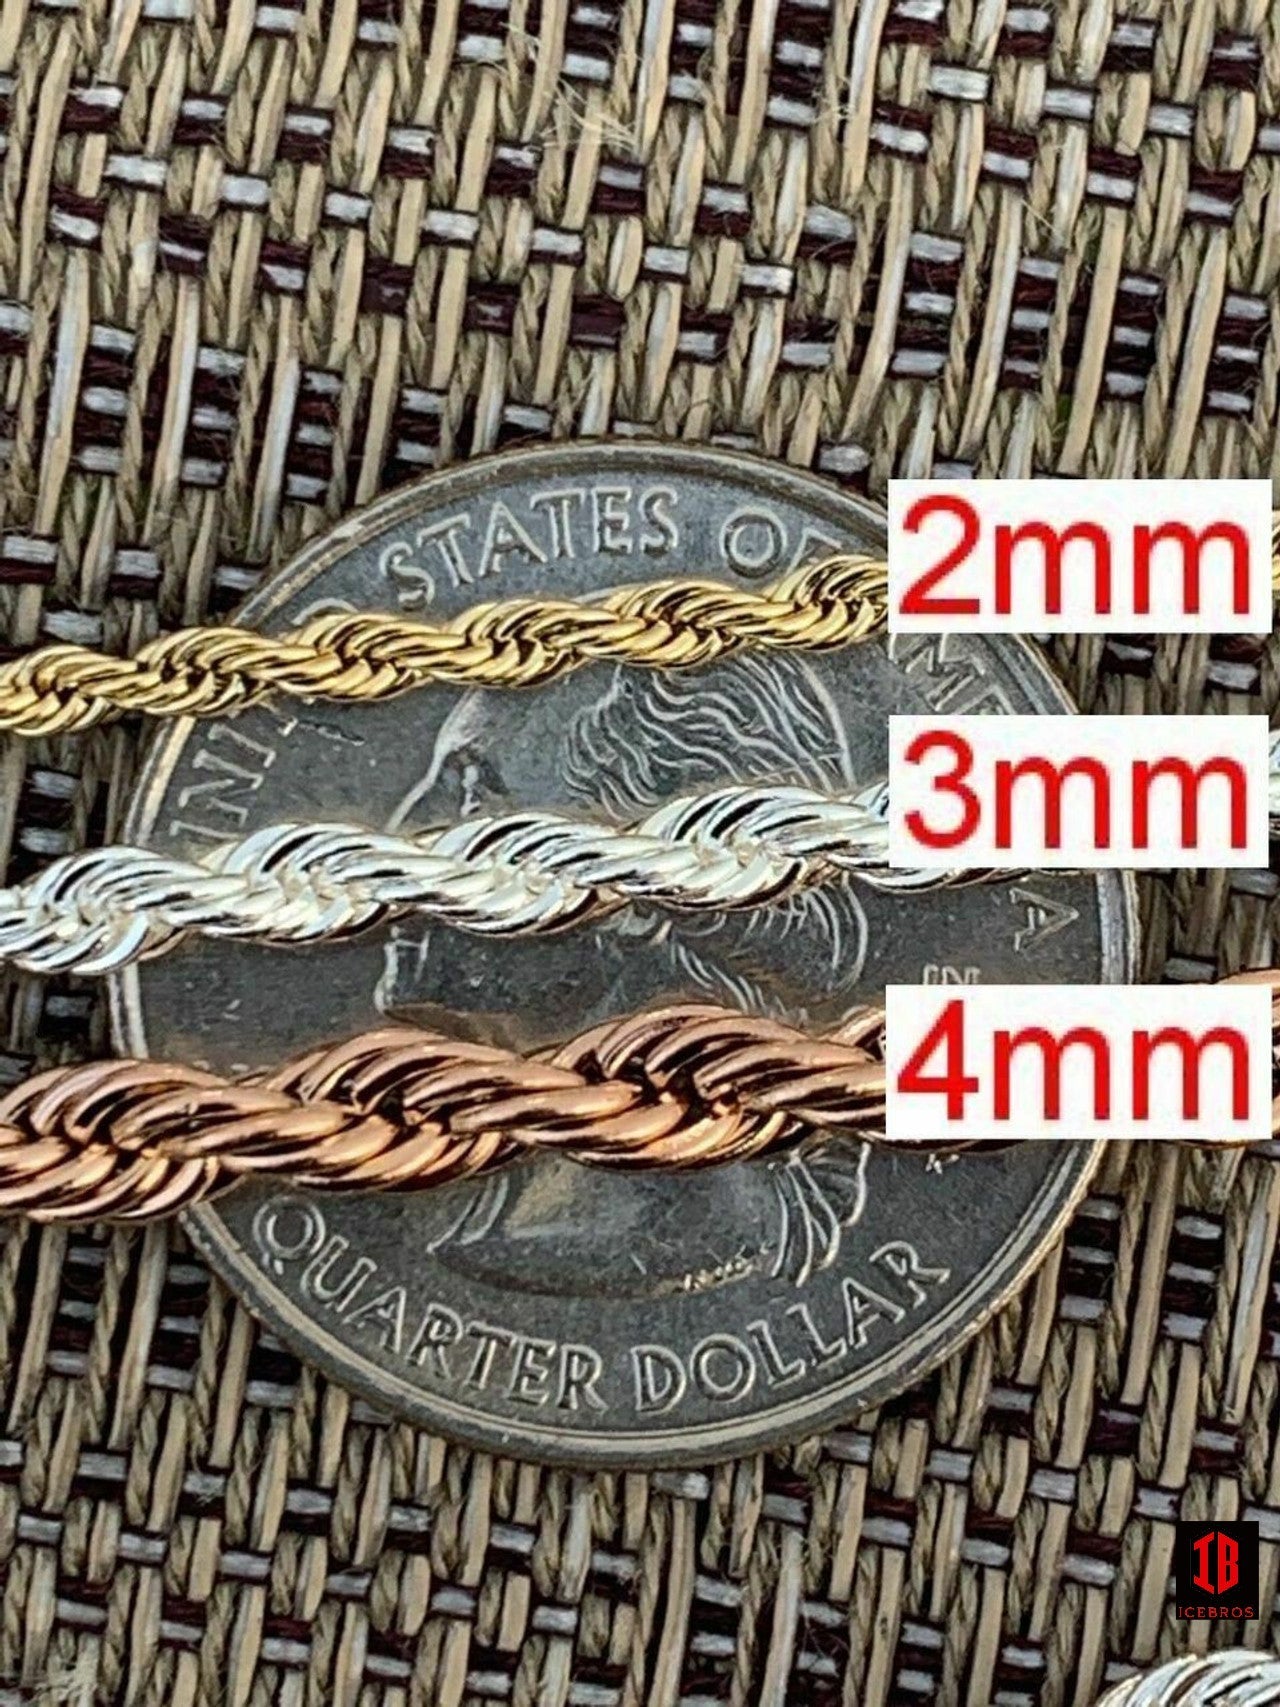 Rope Chain - ROSE Gold Over Solid Stainless Steel - 2-6mm 18-30"